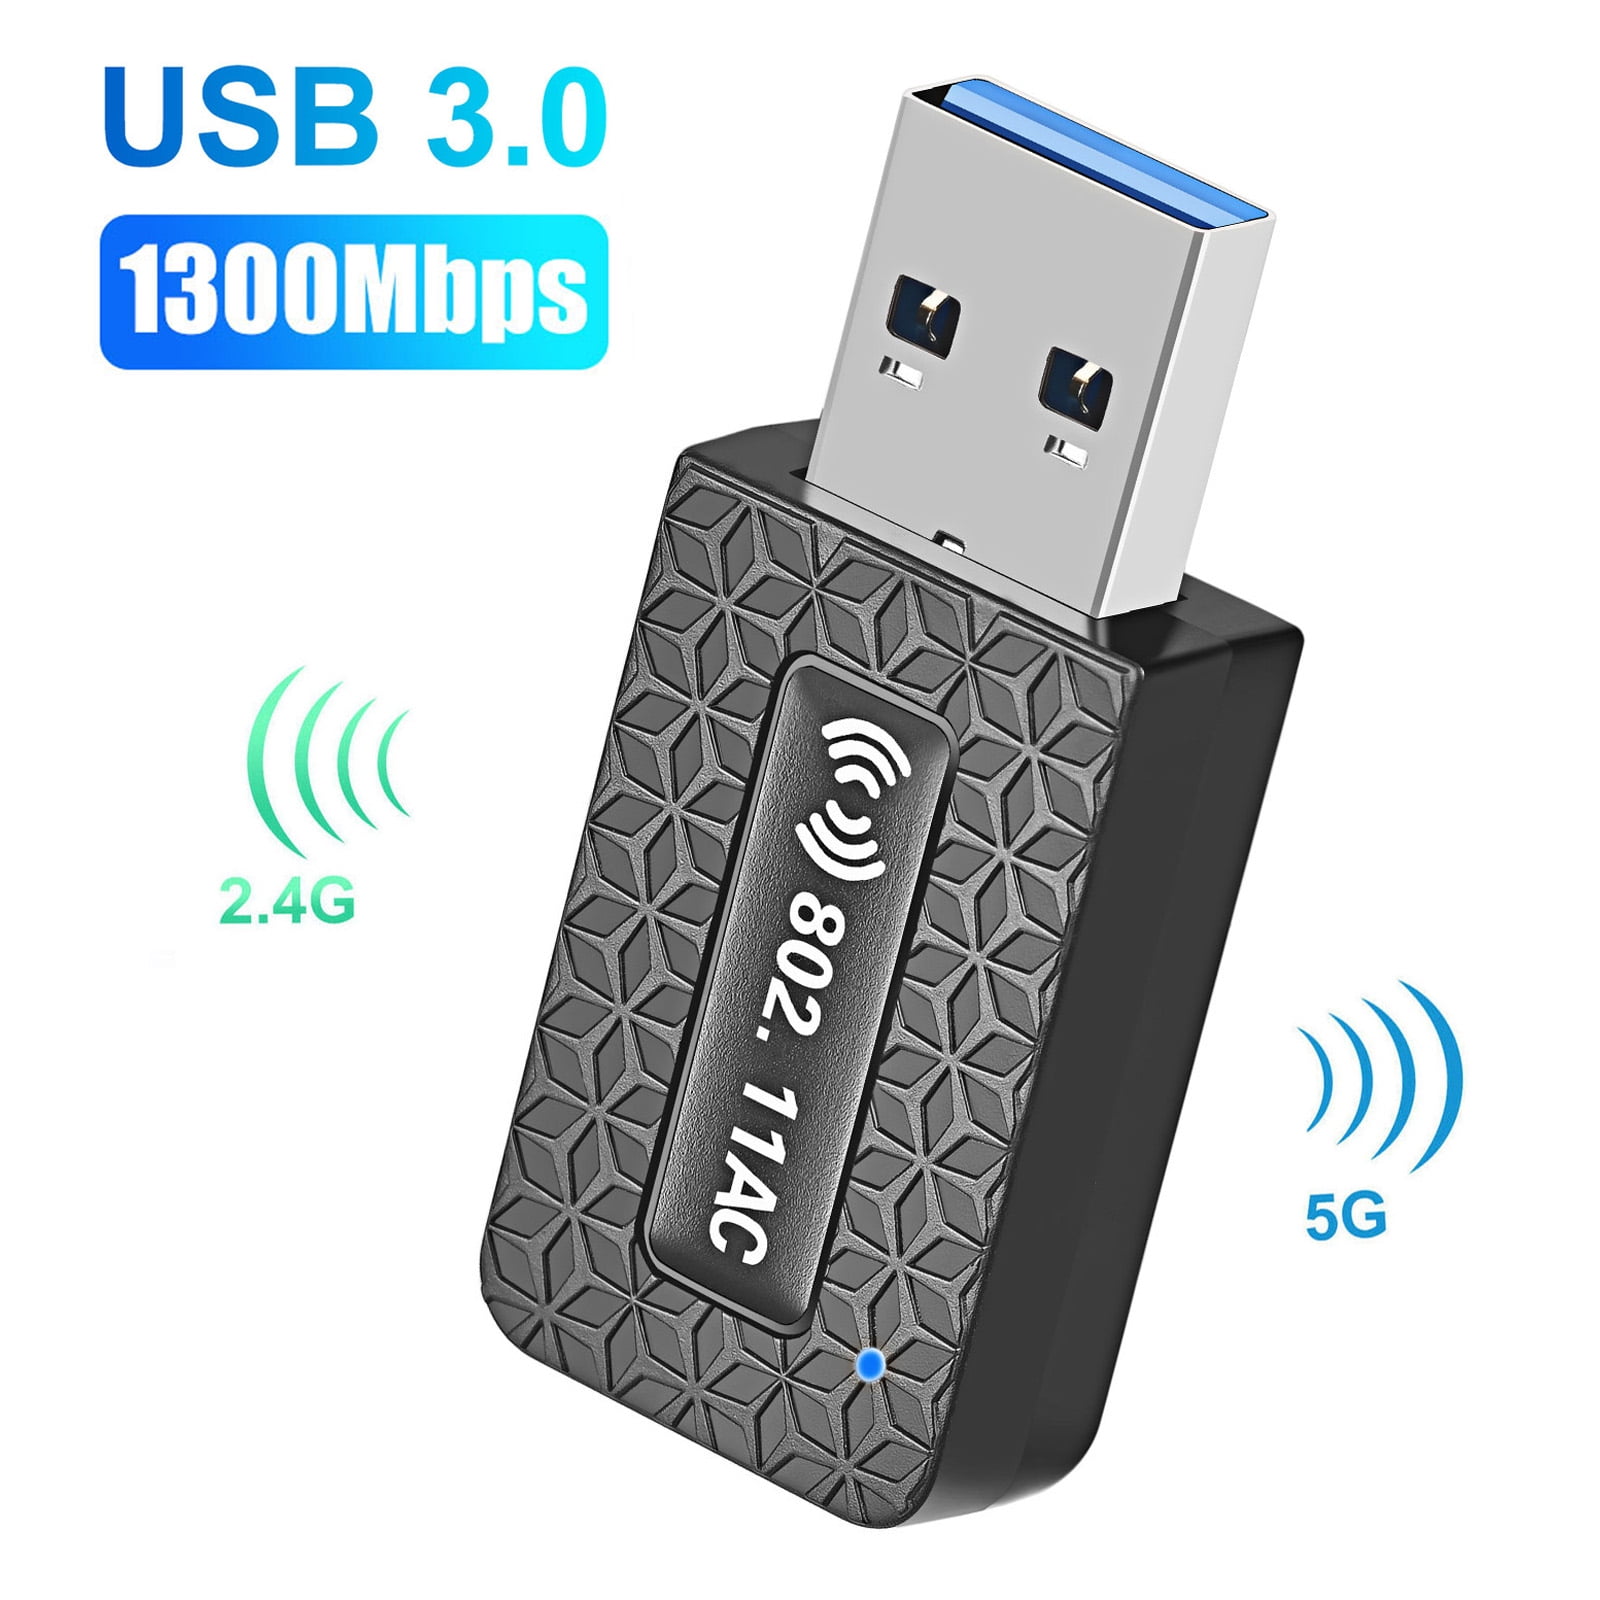 USB Wifi Adapter, 1300M USB 3.0 WiFi Adapter for PC, Desktop, Laptop, Dual  Band 5G /2.4G USB WiFi Dongle Wireless Network Adapter, Supports Windows